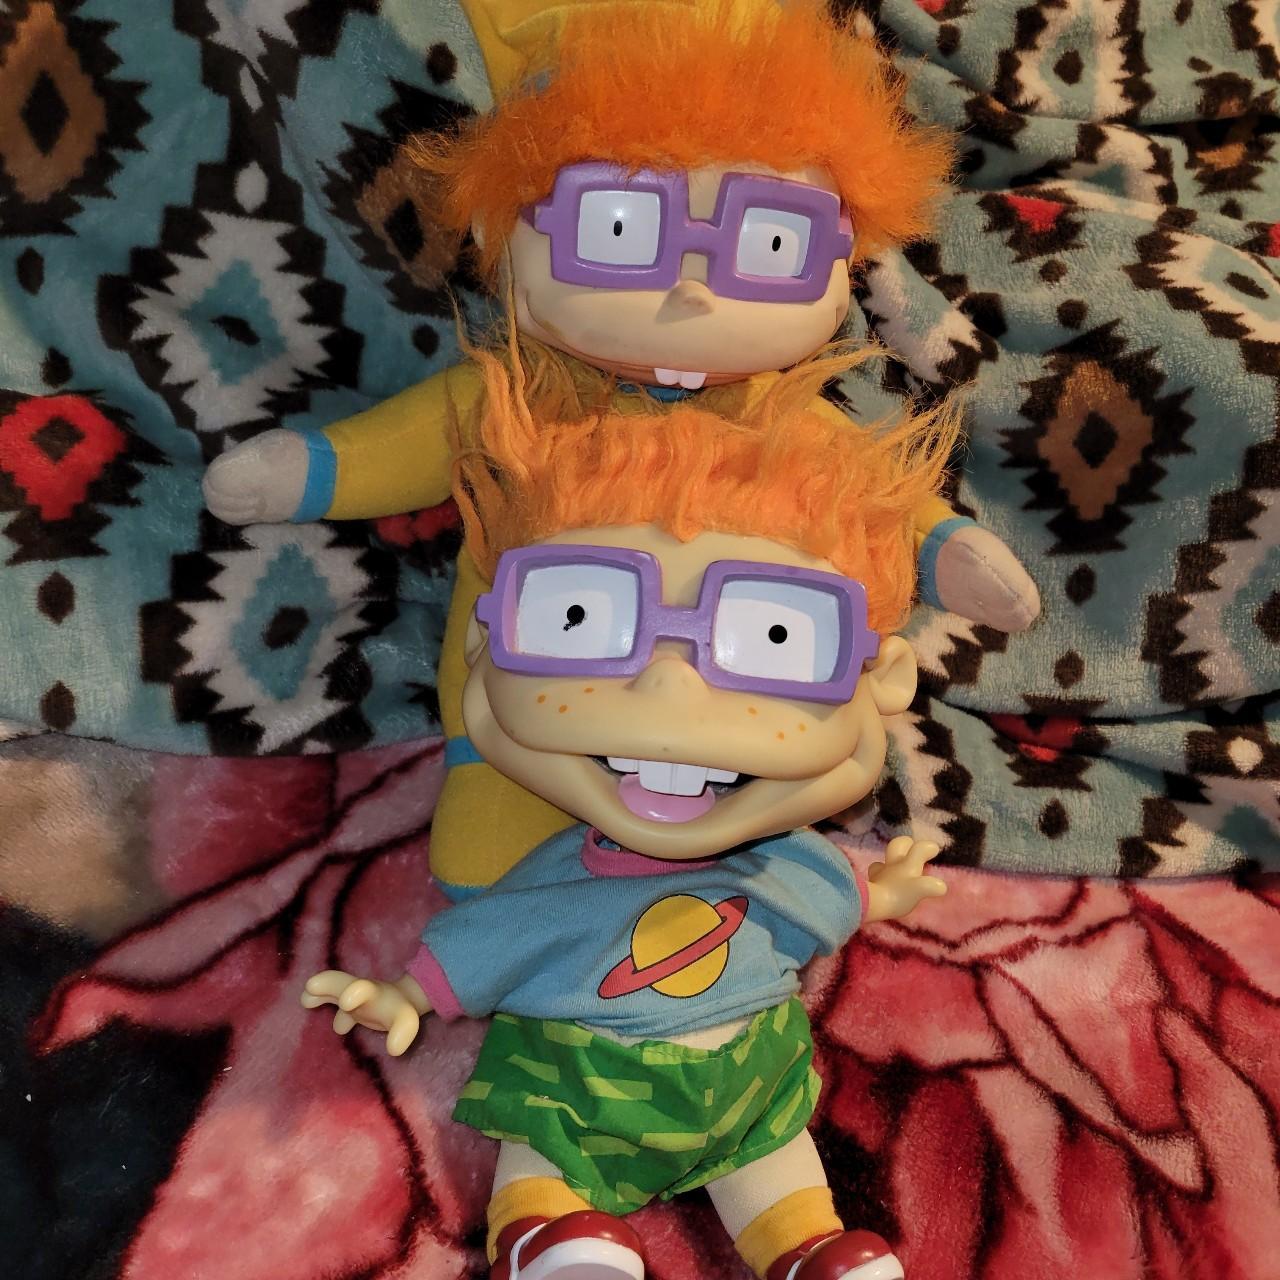 Product Image 3 - Vintage 90's rugrats carlitos collective